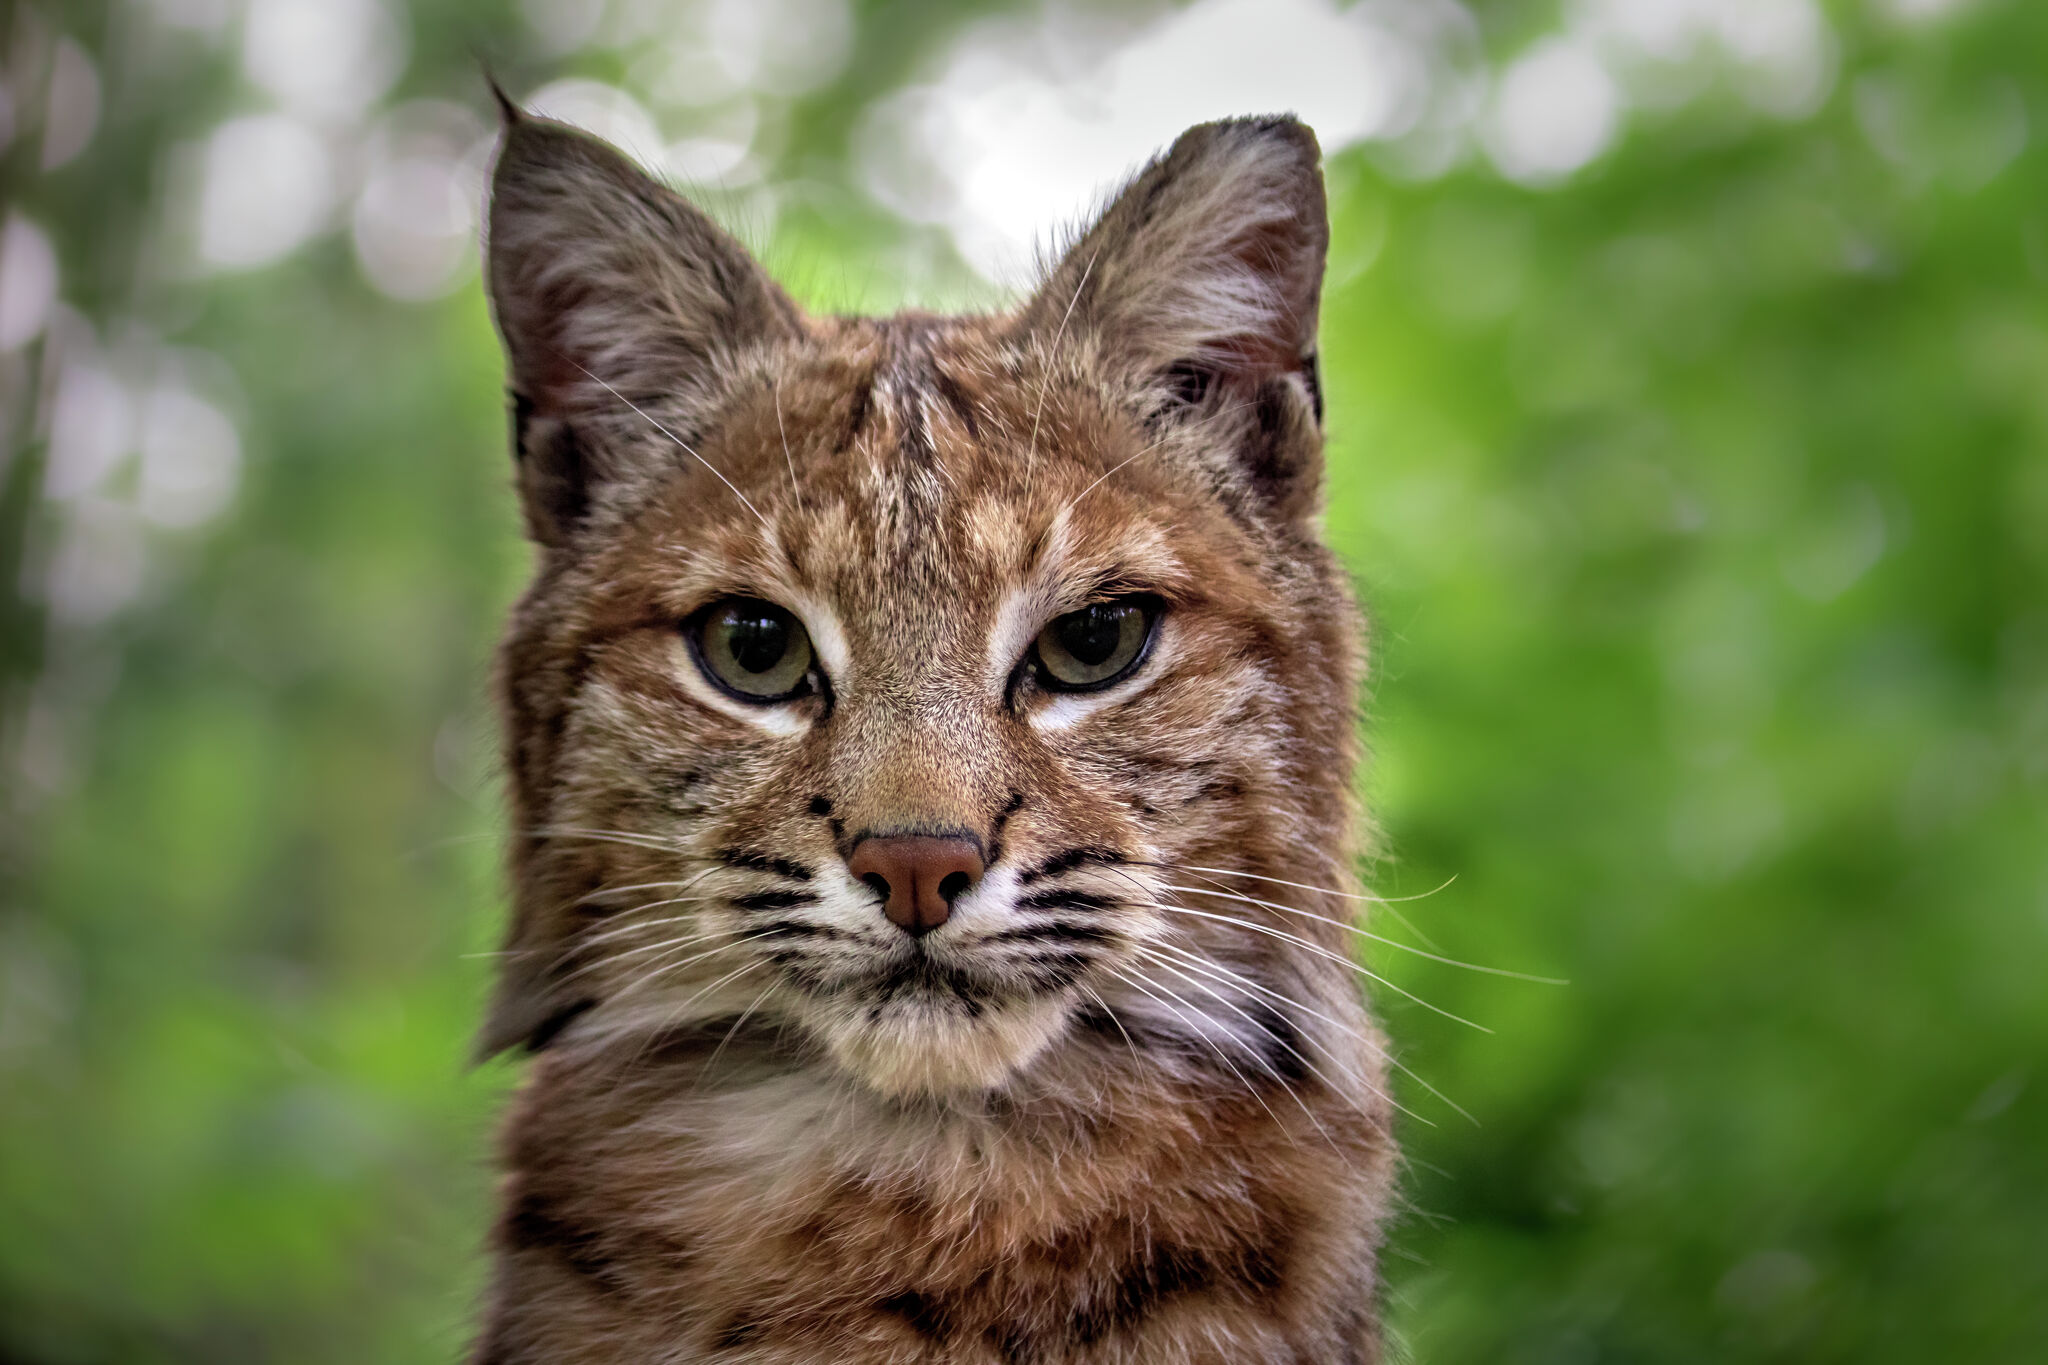 Bobcats are being spotted in the Rio Grande Valley